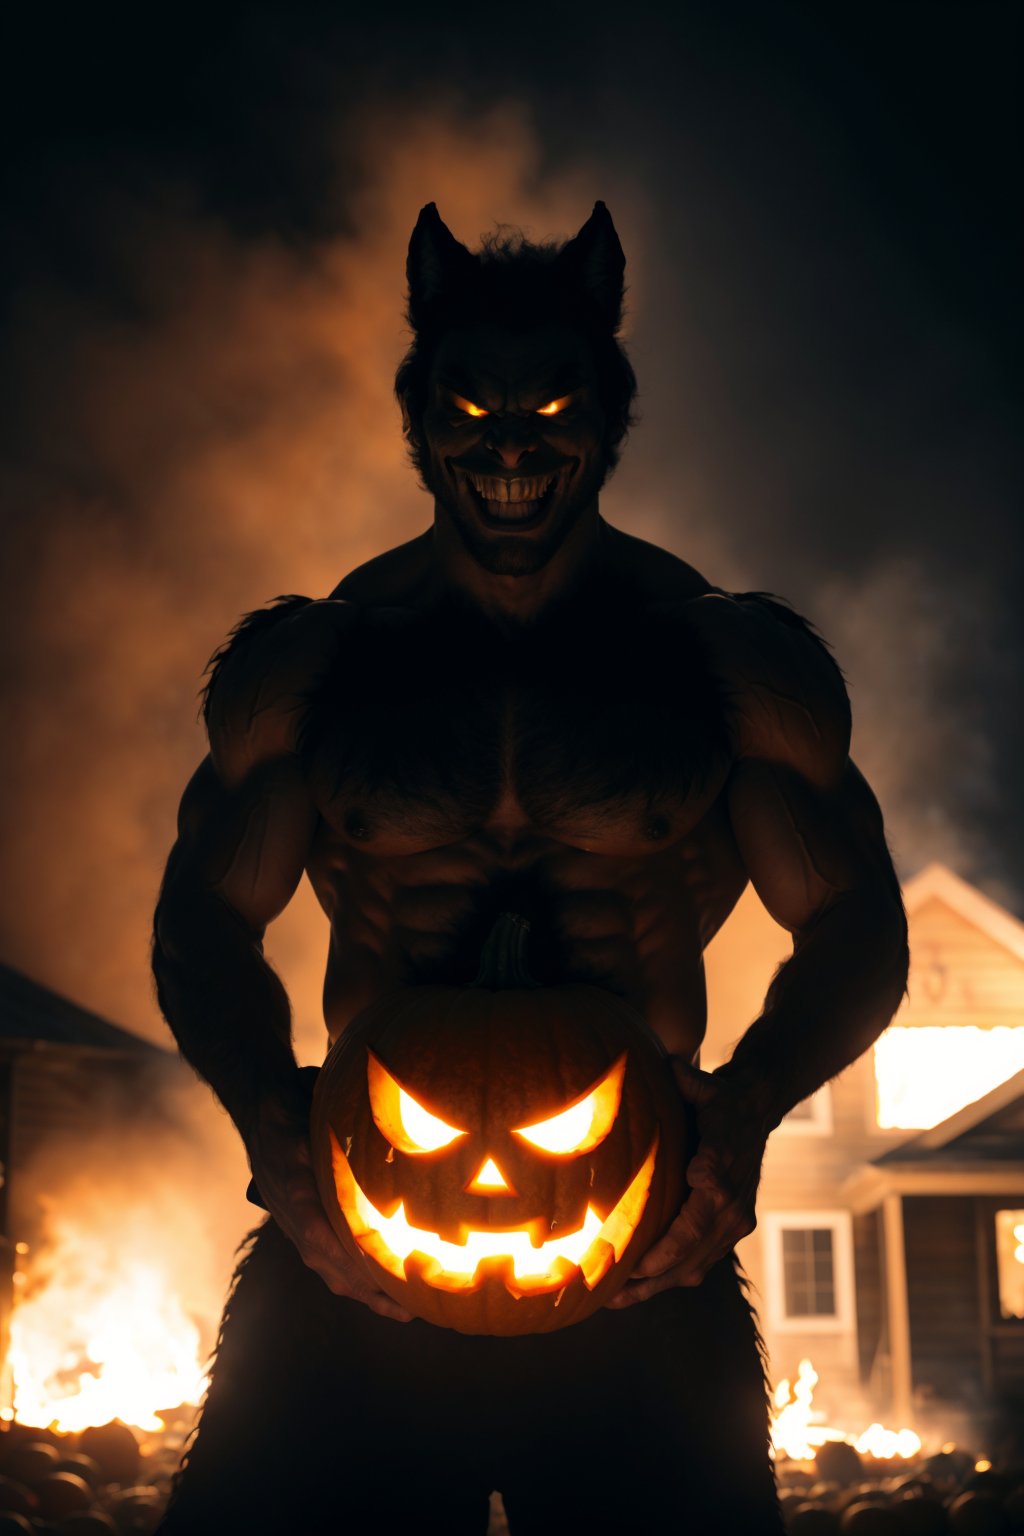 wide shot, (solo:1.2), evil pumpkin face, [(a muscular man:0.8):(werewolf sillhouette:1.15)] (holding:1.1) pumpkin, (messy fur:1.15), grin, crazy, halloween, wildfire in the night, (burning house:1.1) <lora:FilmVelvia3:0.6>, slate atmosphere, cinematic, dimmed colors, dark shot, muted colors, film grainy, lut, spooky